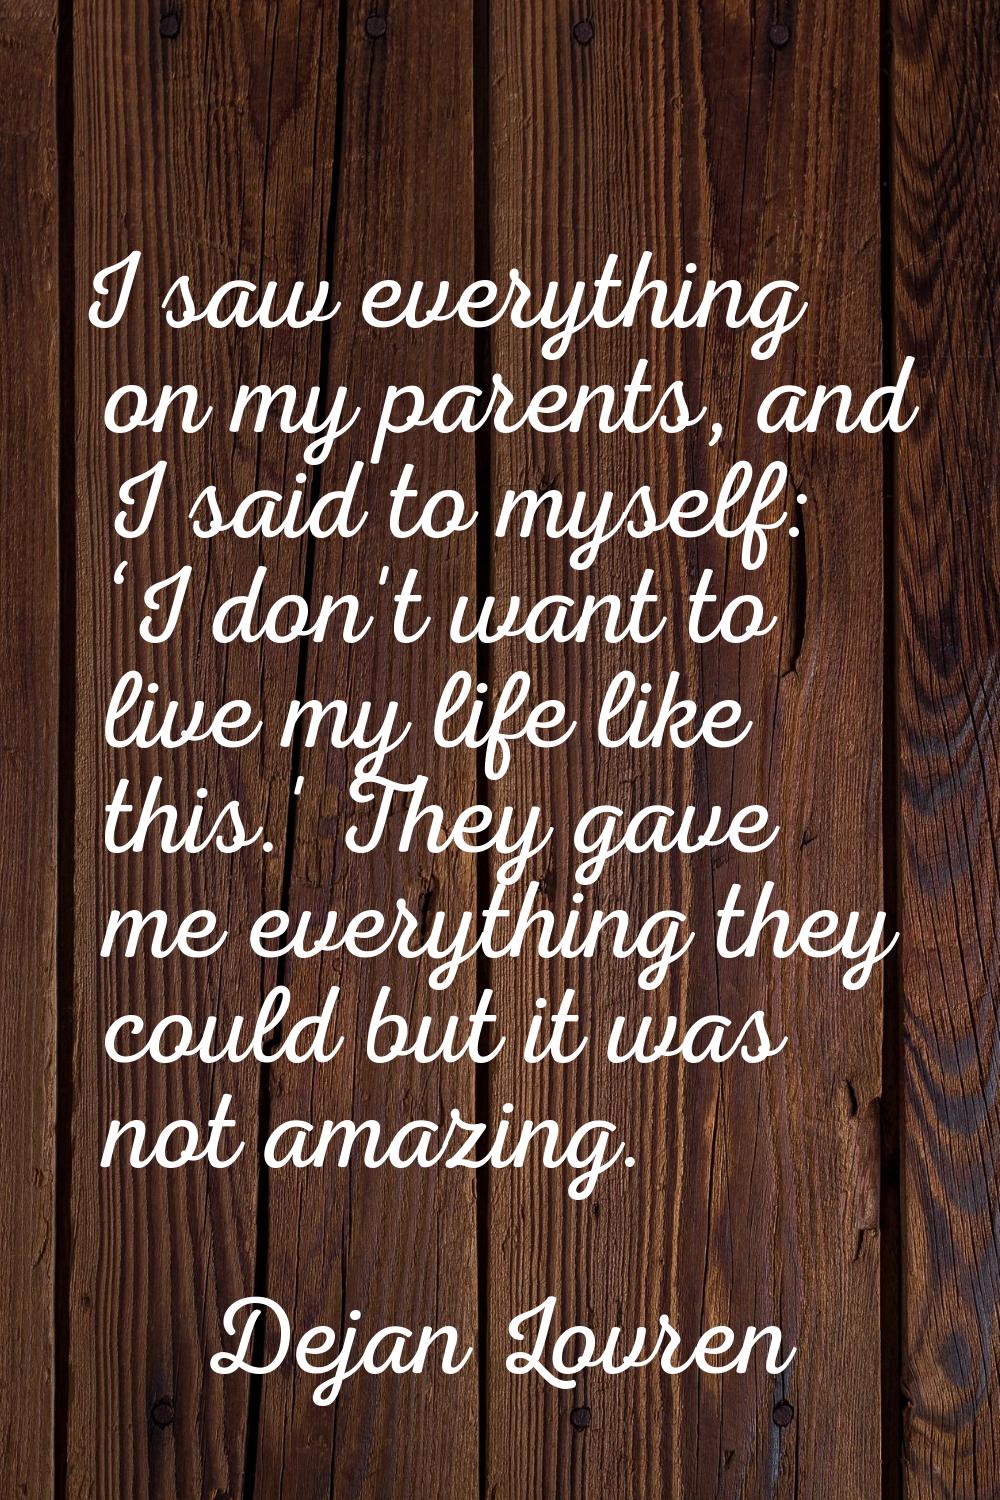 I saw everything on my parents, and I said to myself: ‘I don't want to live my life like this.' The